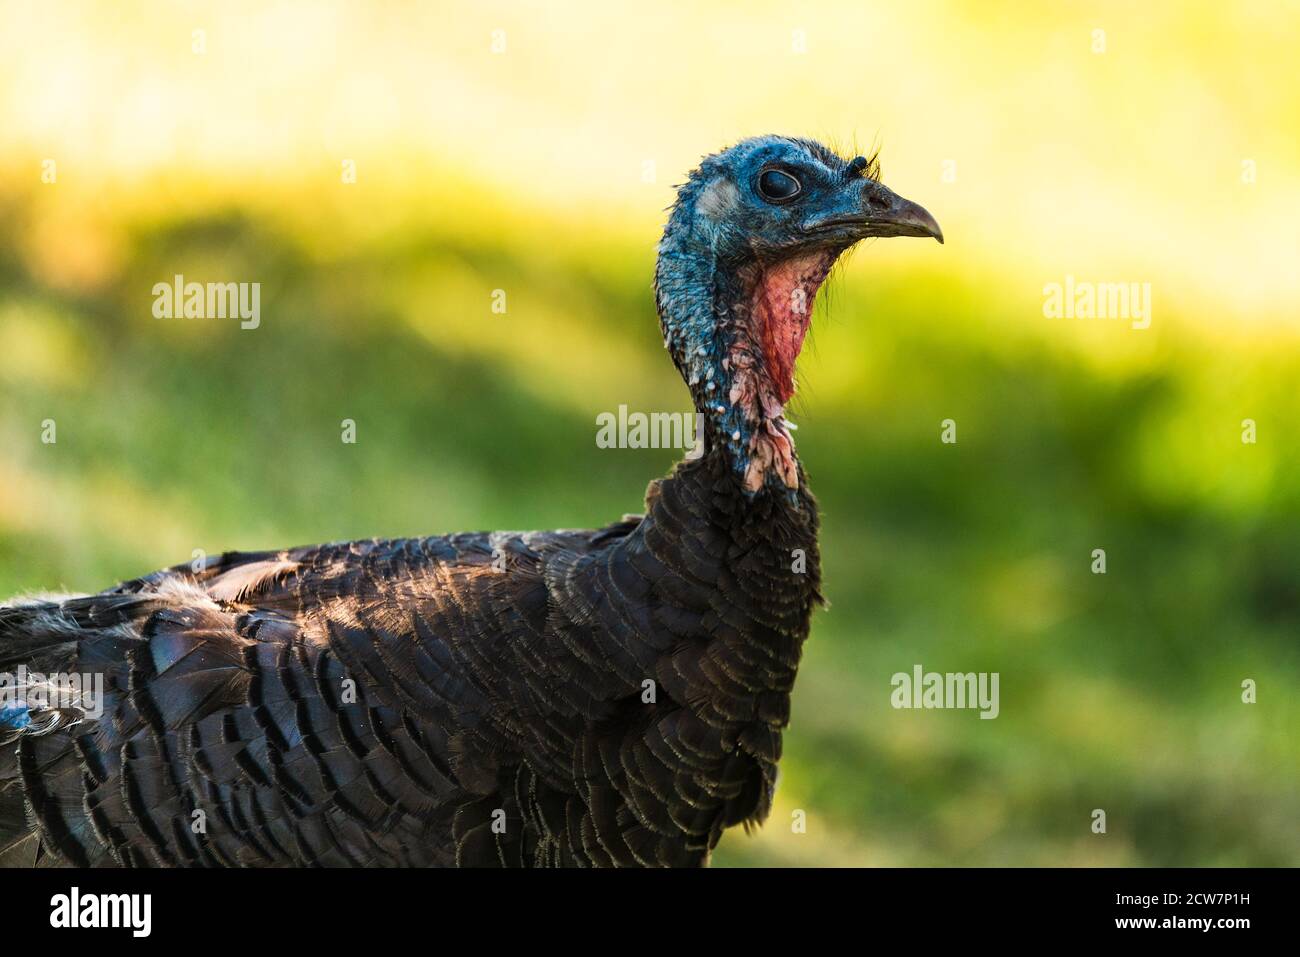 Wild Turkey close-up portrait with a smooth green background Stock Photo